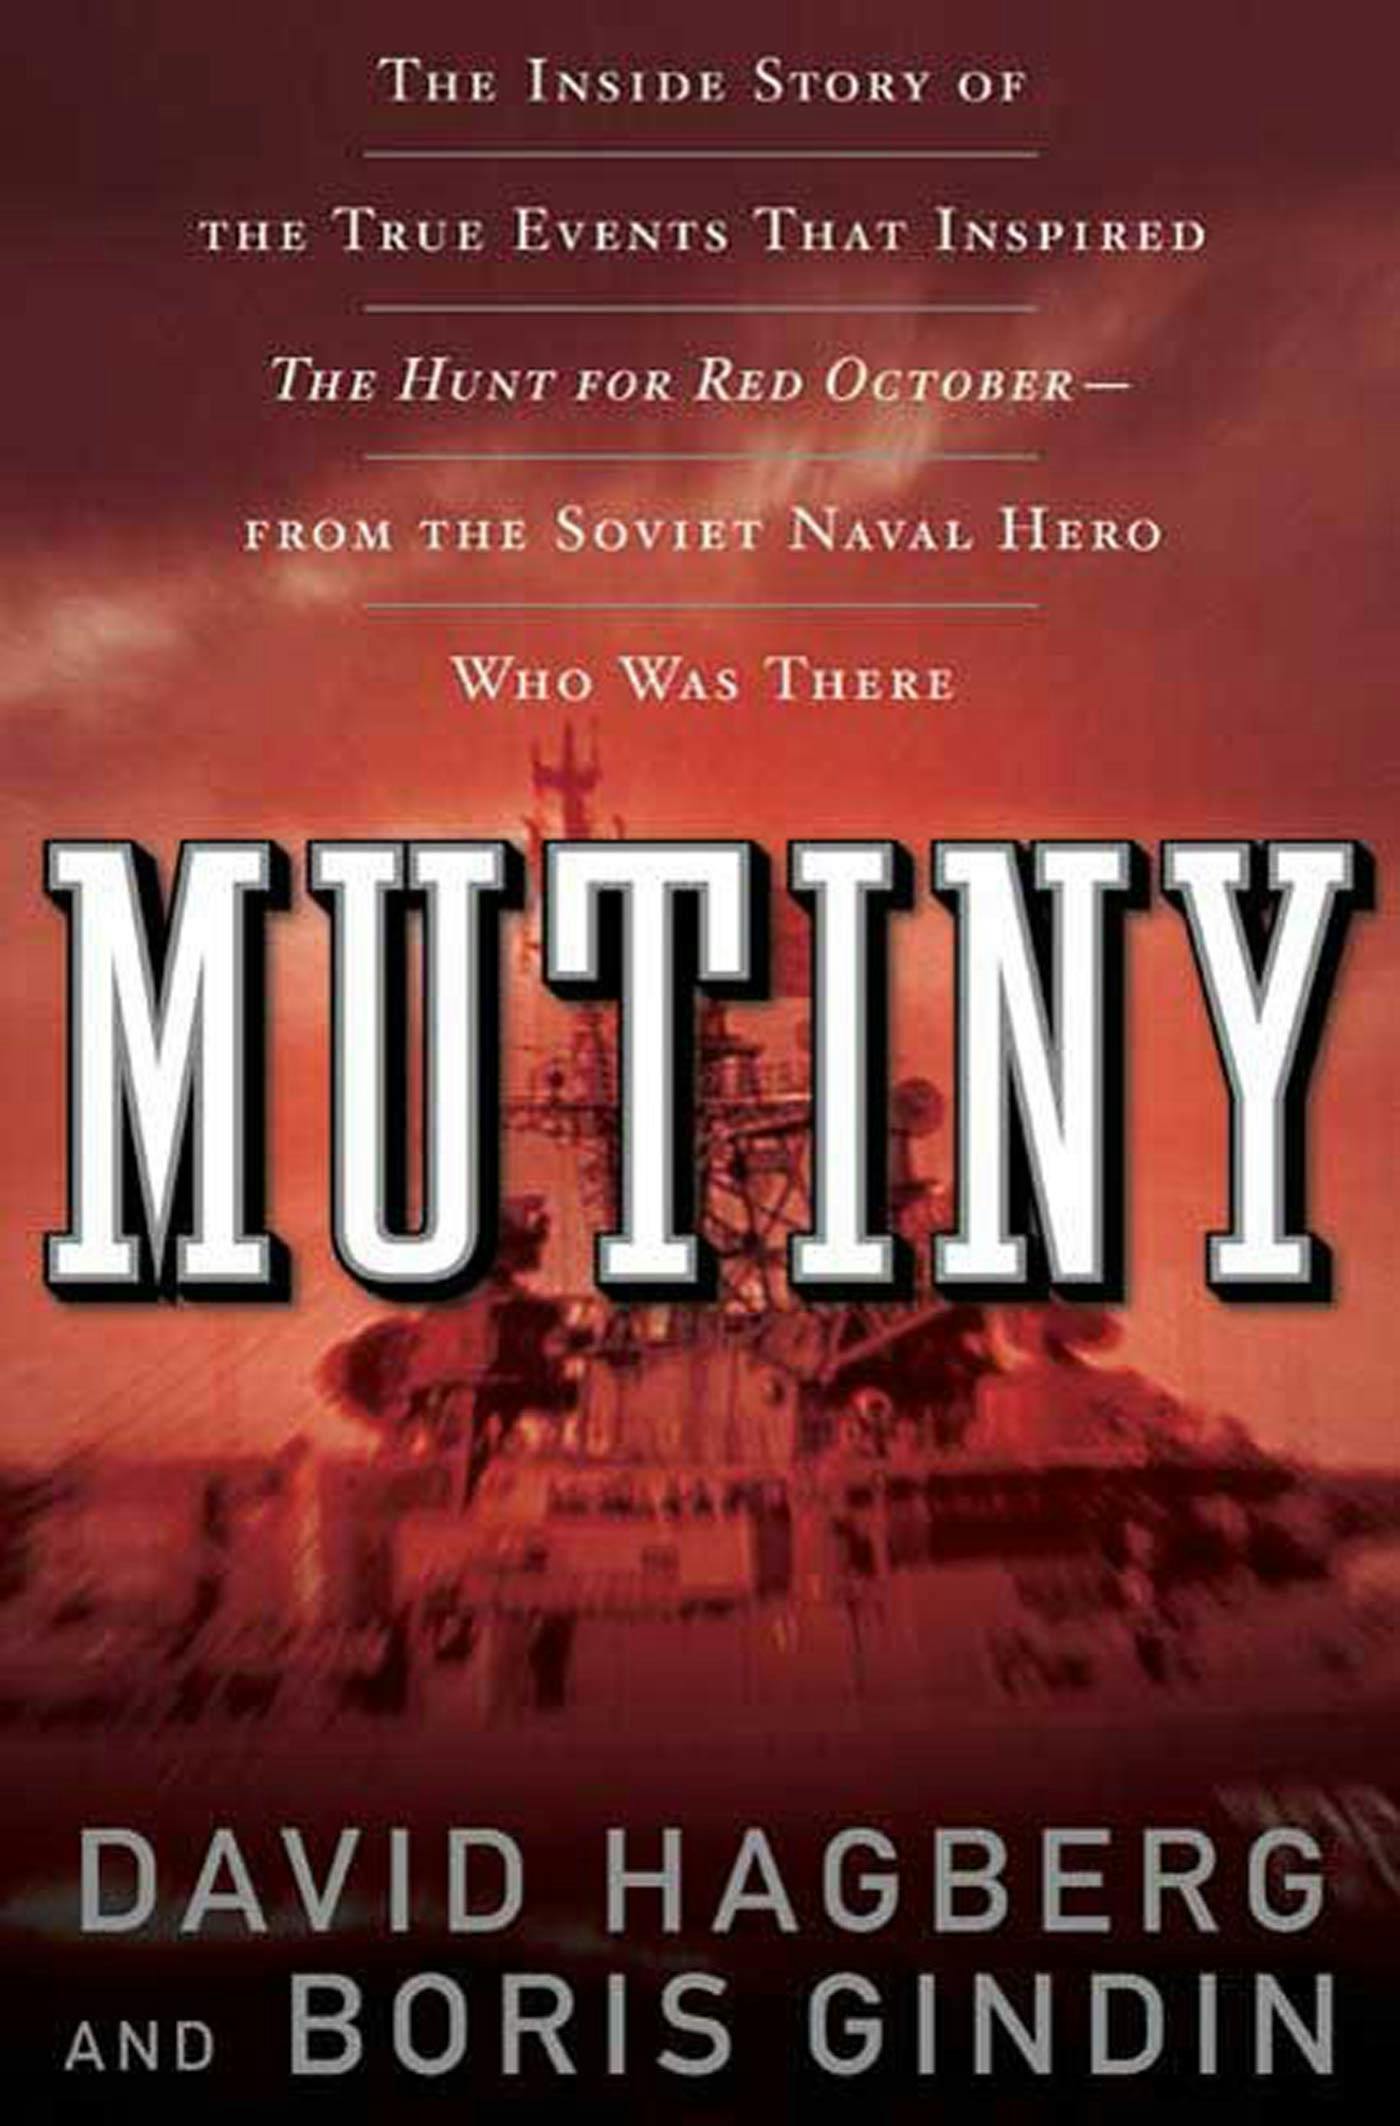 Why Tom Clancy's The Hunt For Red October had the Navy running scared